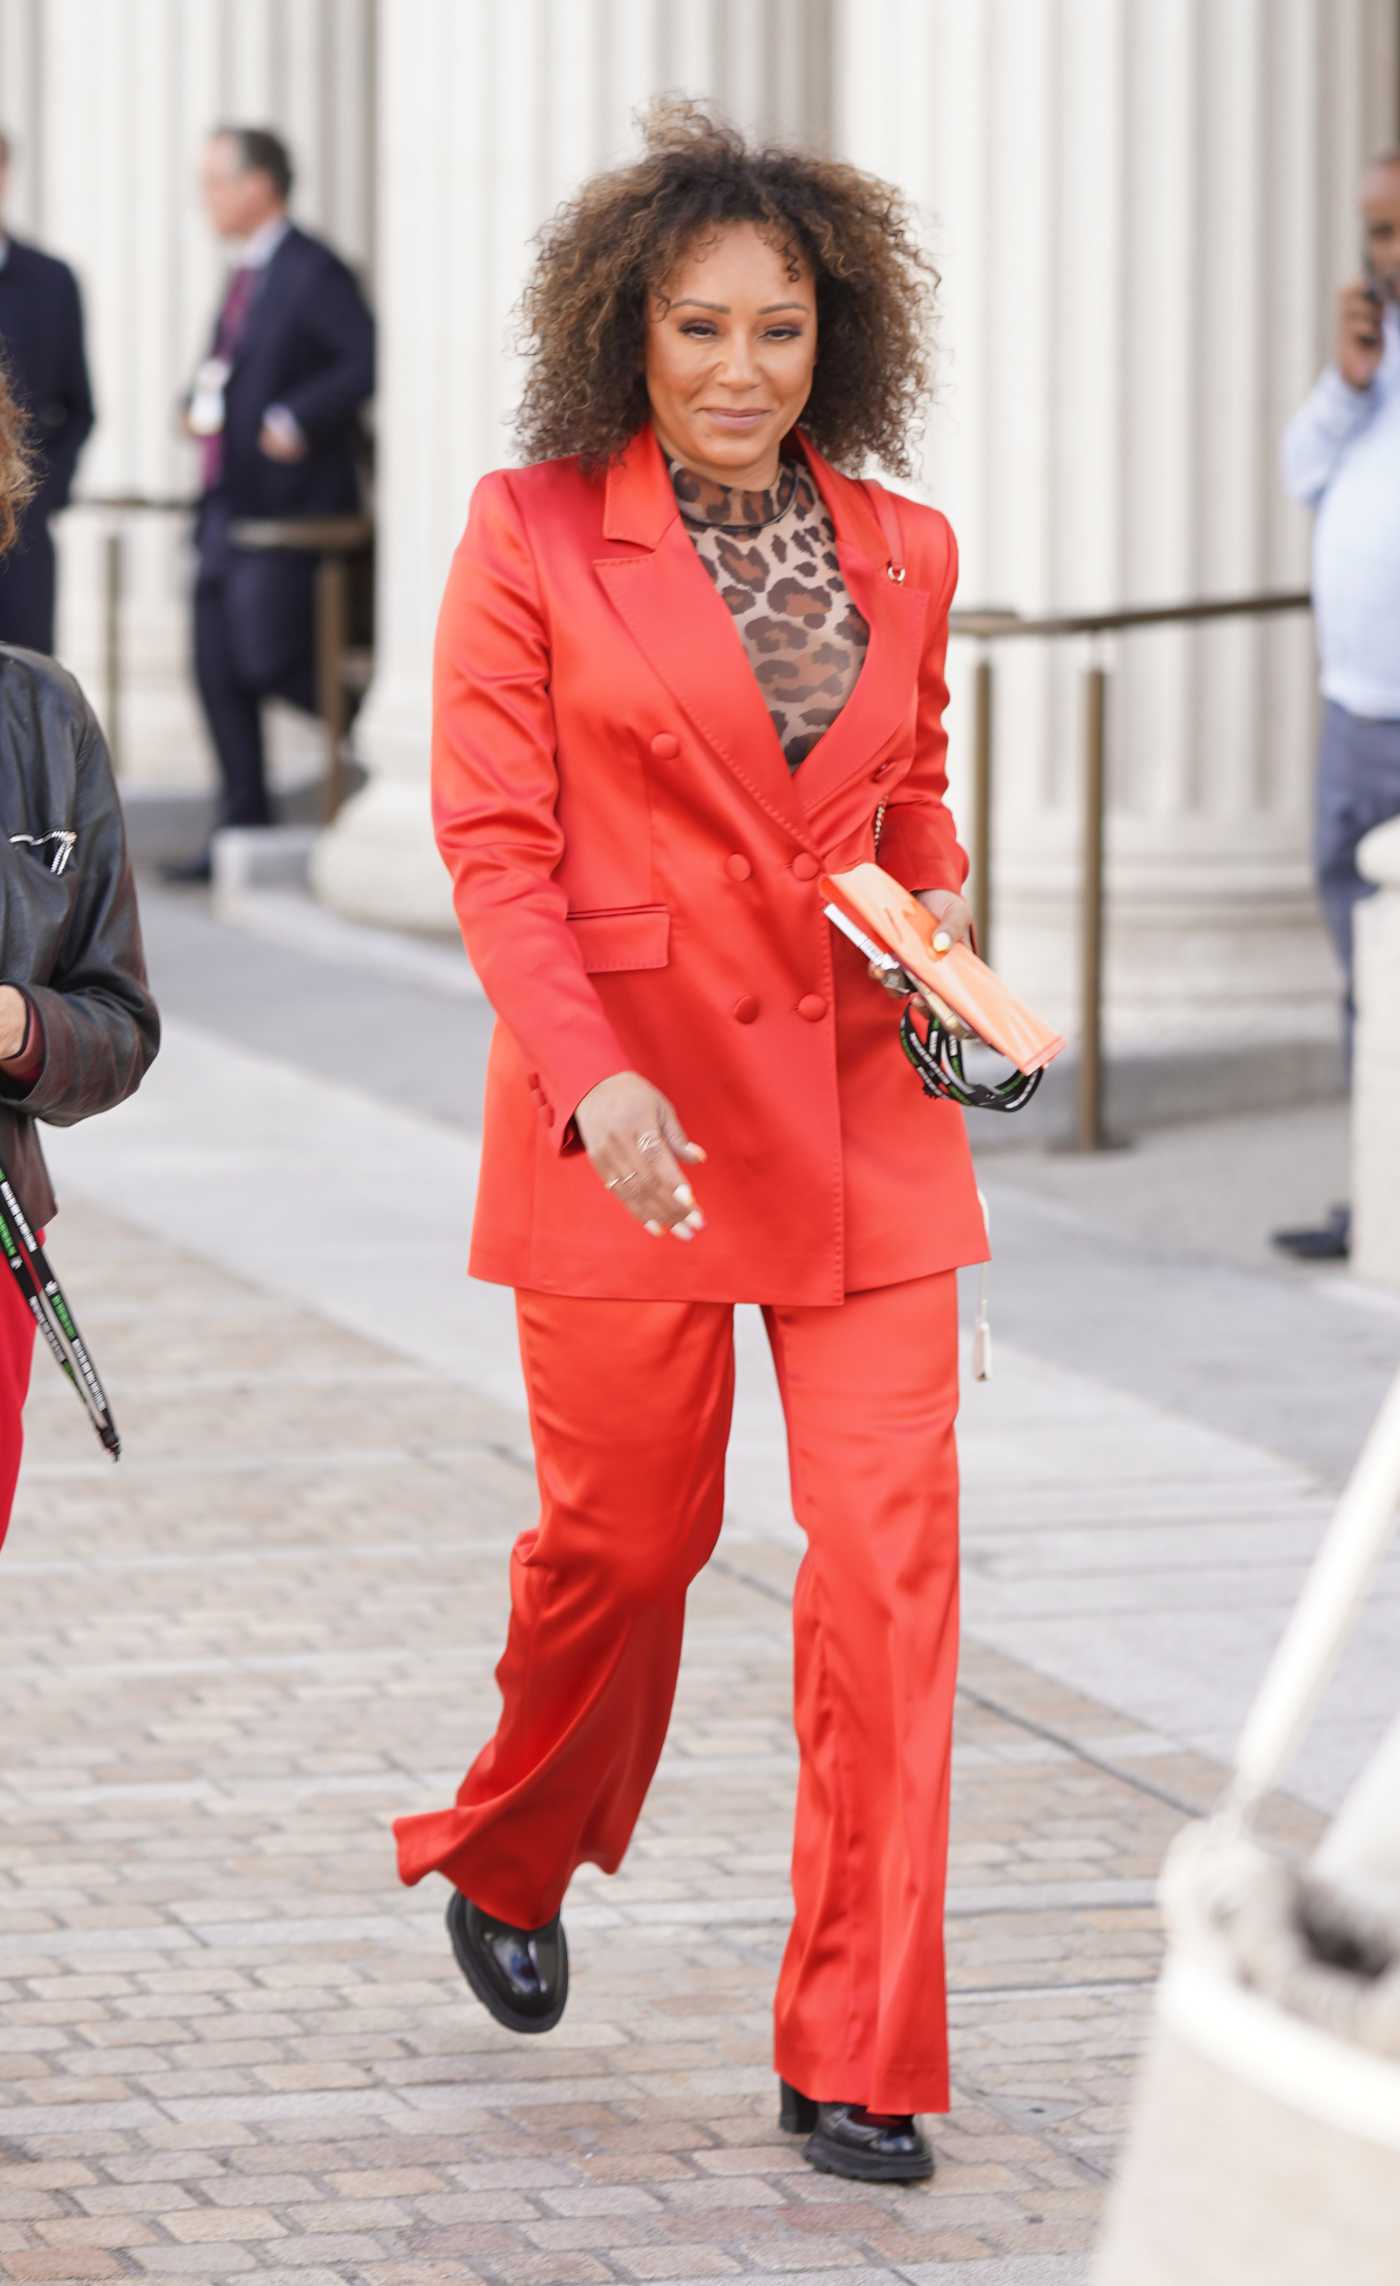 Melanie Brown in a Red Pantsuit Arrives at the Conservative Party Conference in Birmingham 10/02/2022